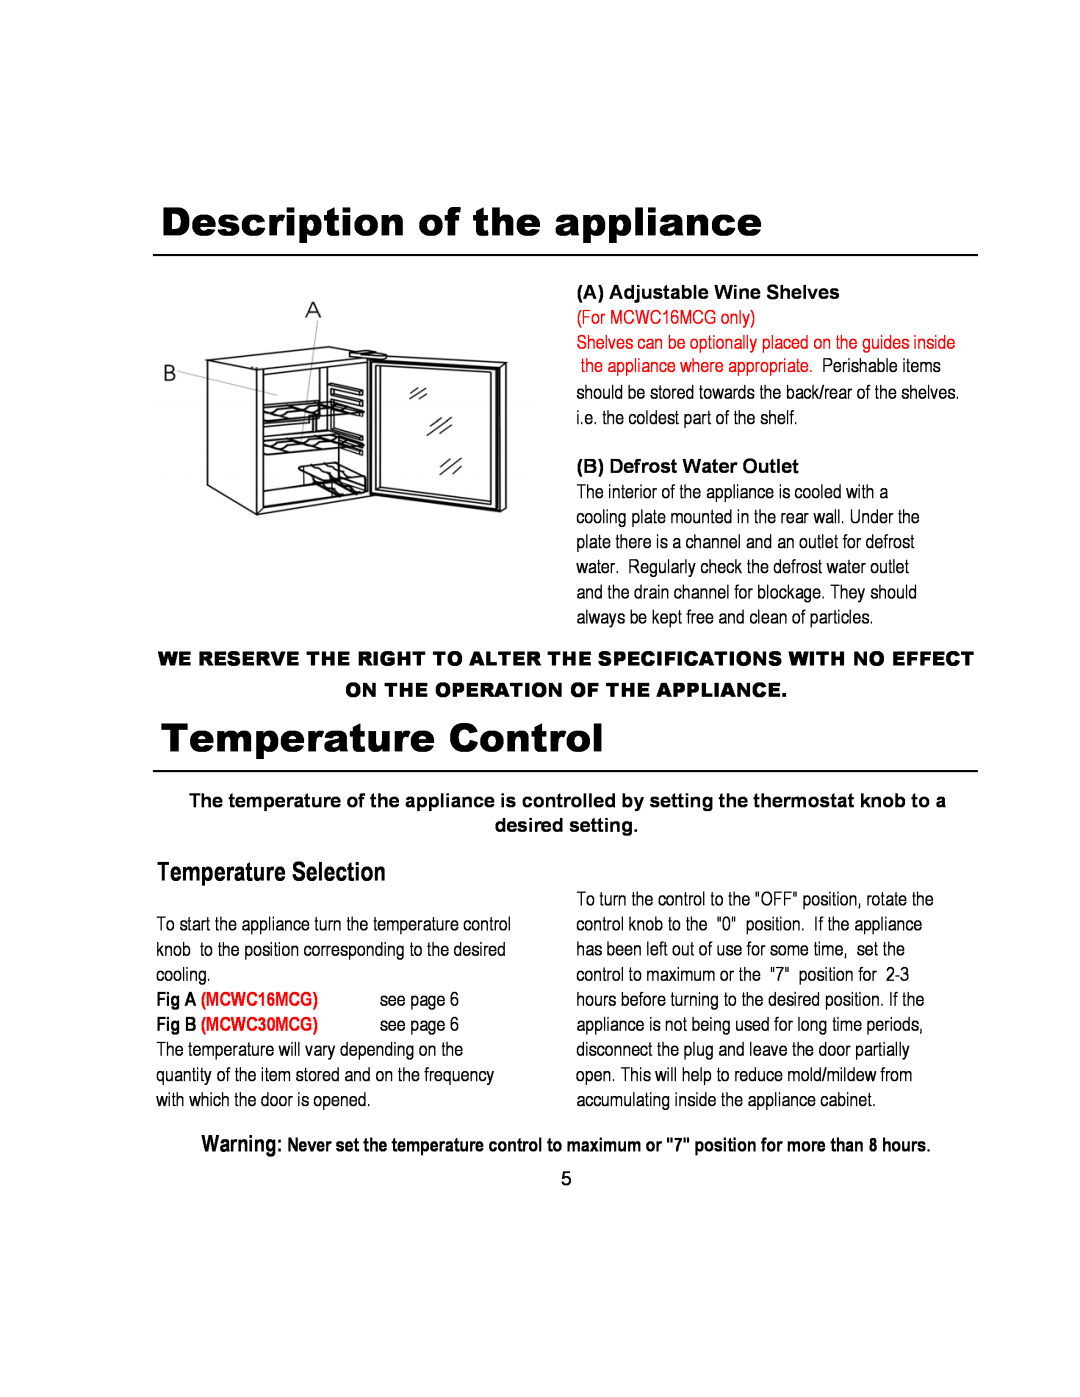 Magic Chef MCWC16MCG Description of the appliance, Temperature Control, Temperature Selection, B Defrost Water Outlet 